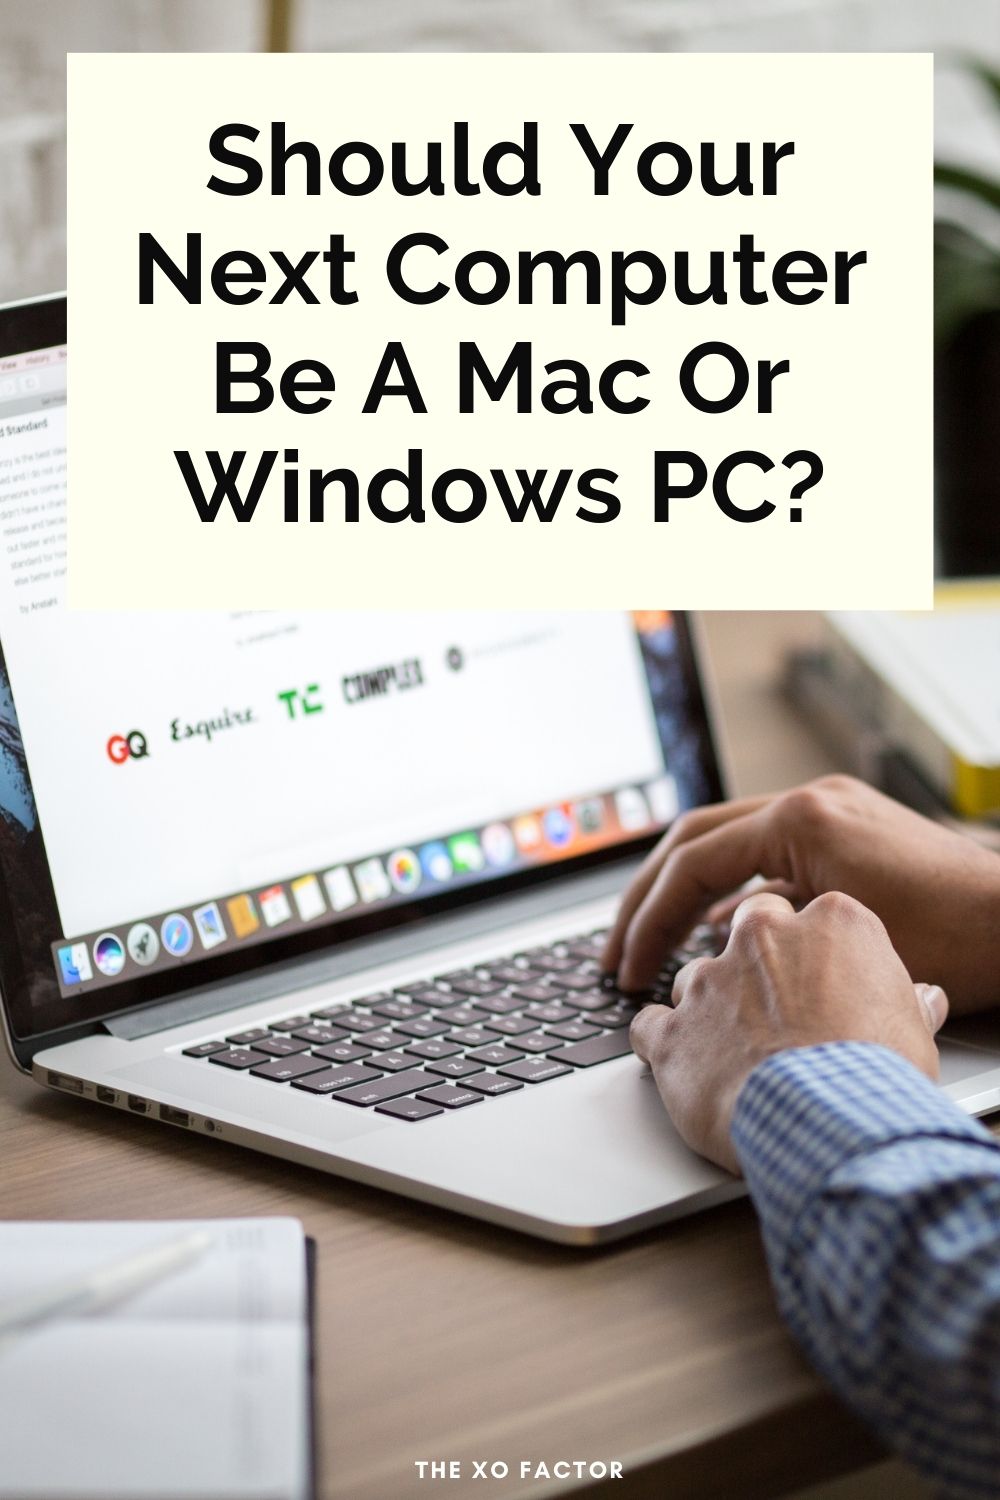 Should Your Next Computer Be A Mac Or Windows PC?